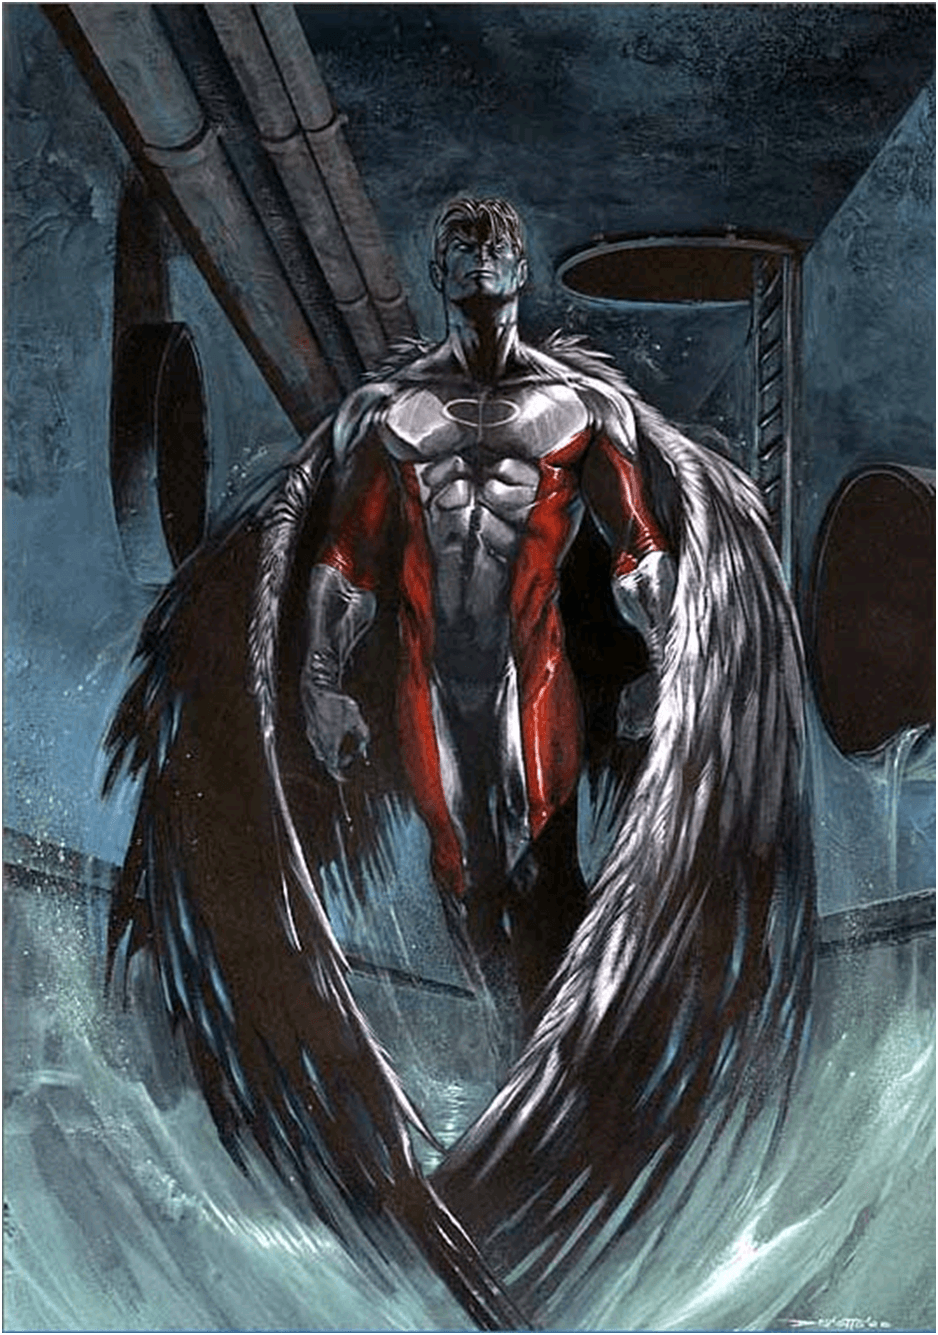 Another pic of the Xmen's Archangel. Comic / Video Art. Marvel